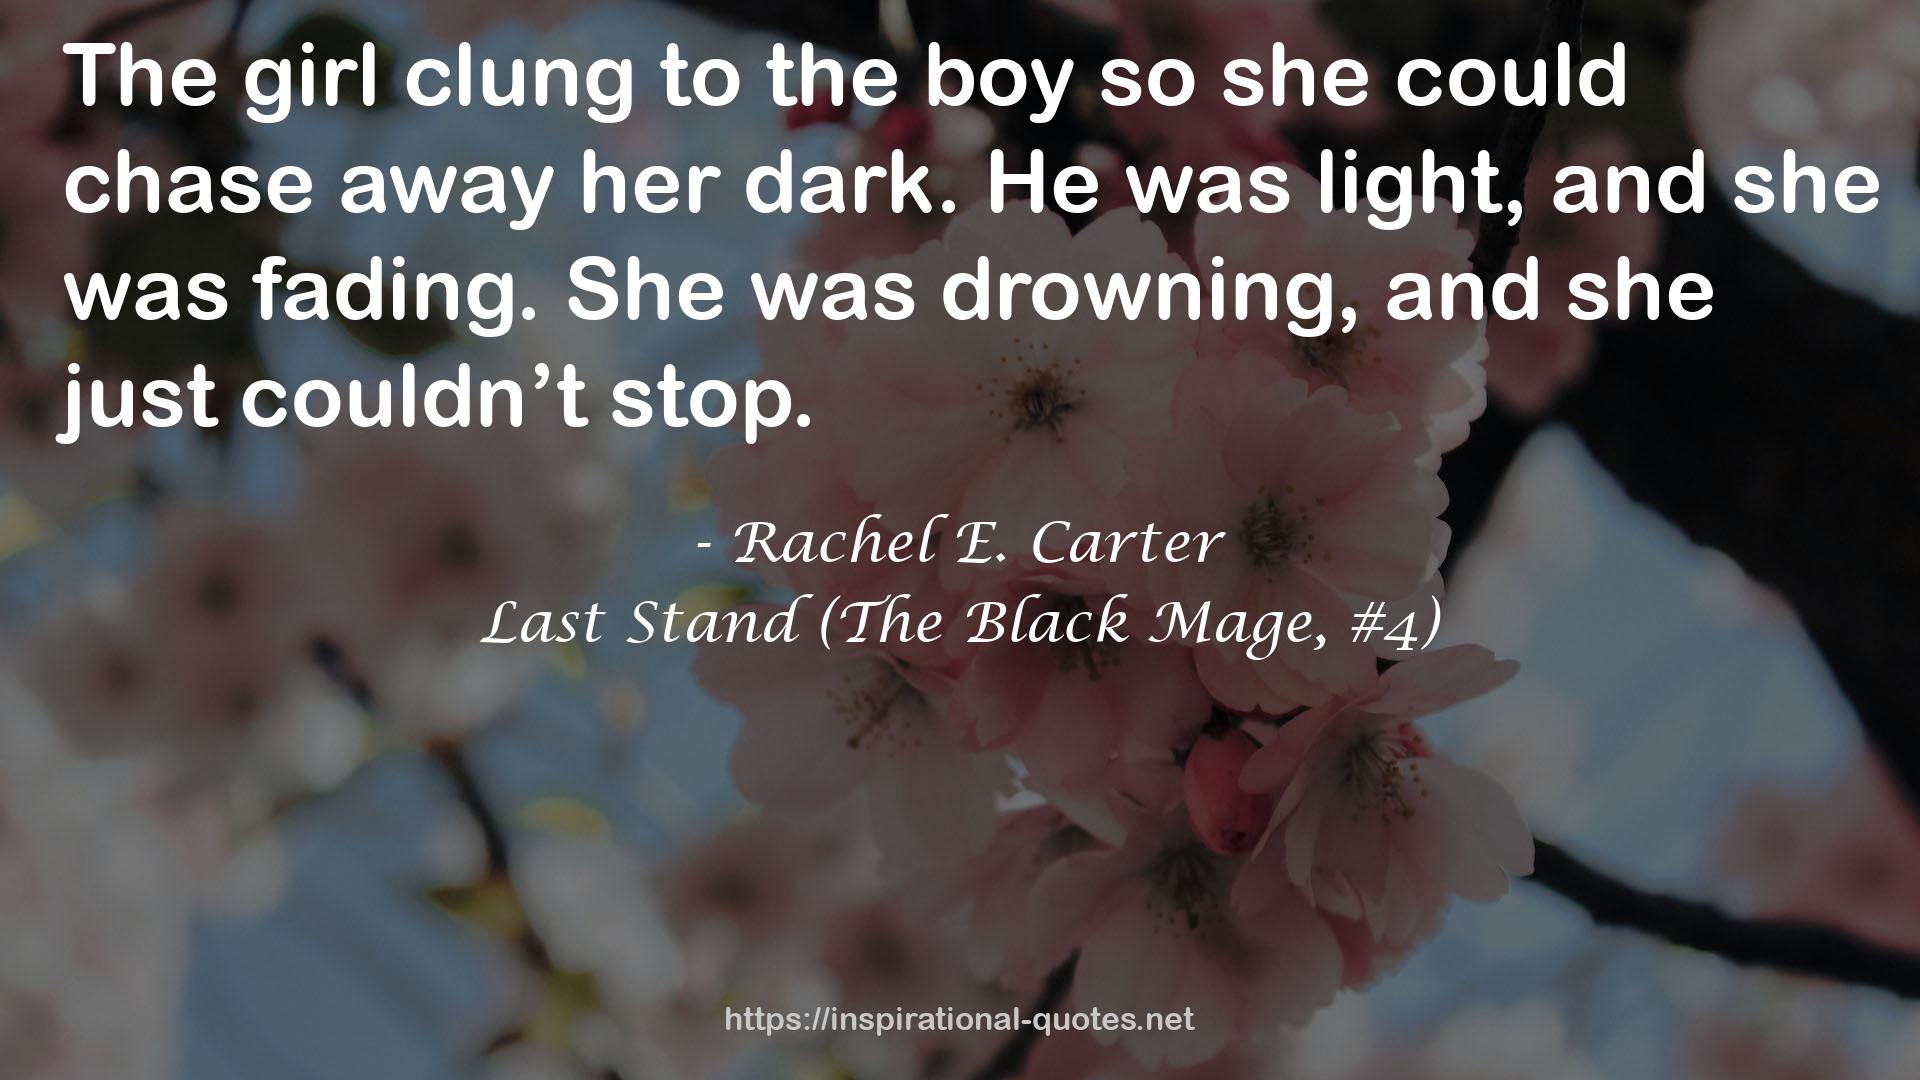 Last Stand (The Black Mage, #4) QUOTES